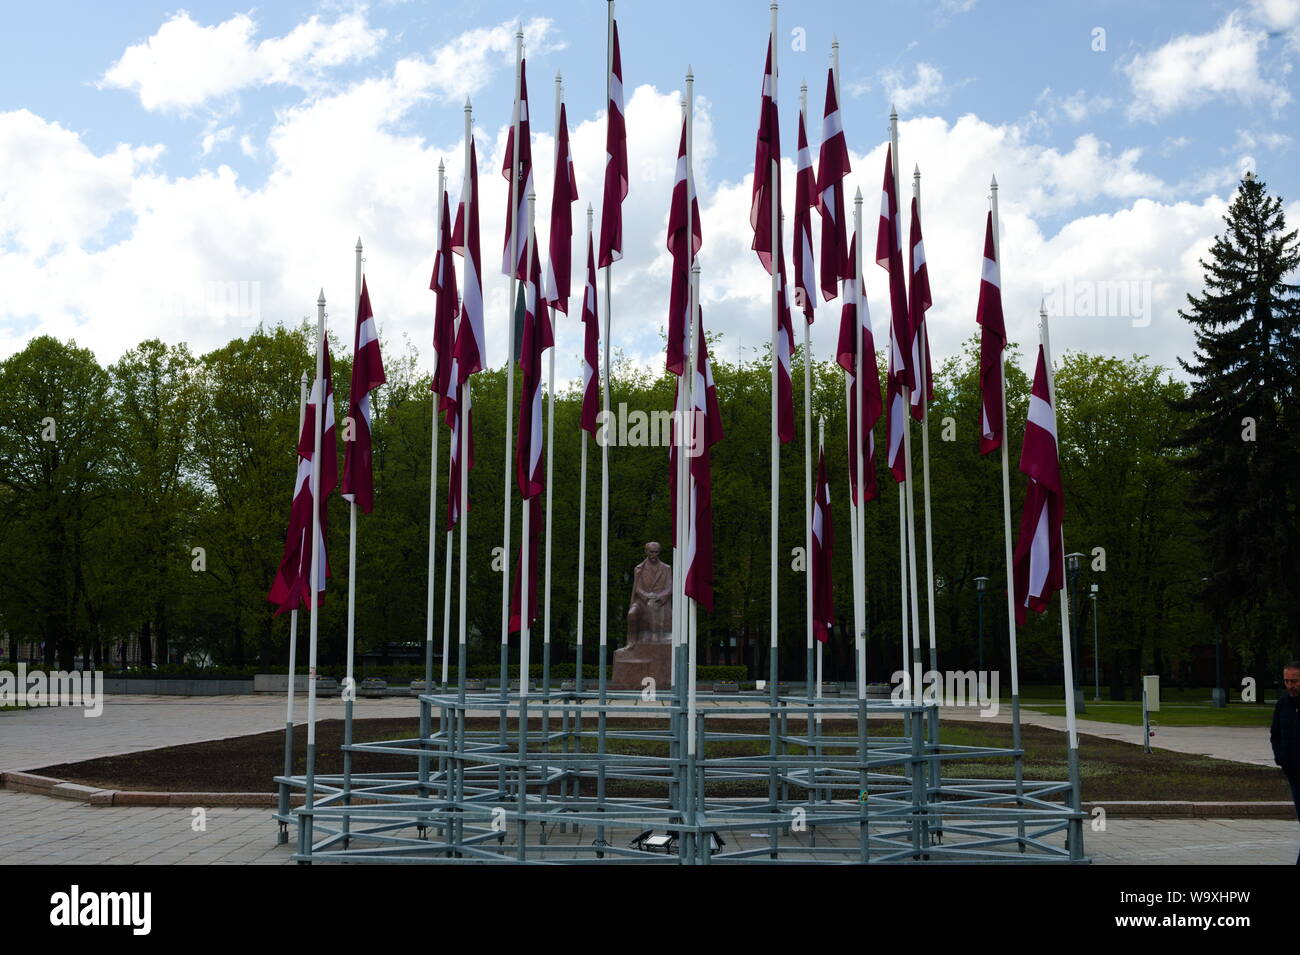 Flags flying proudly in honor of Latvia Independence Day in Riga, Latvia Stock Photo